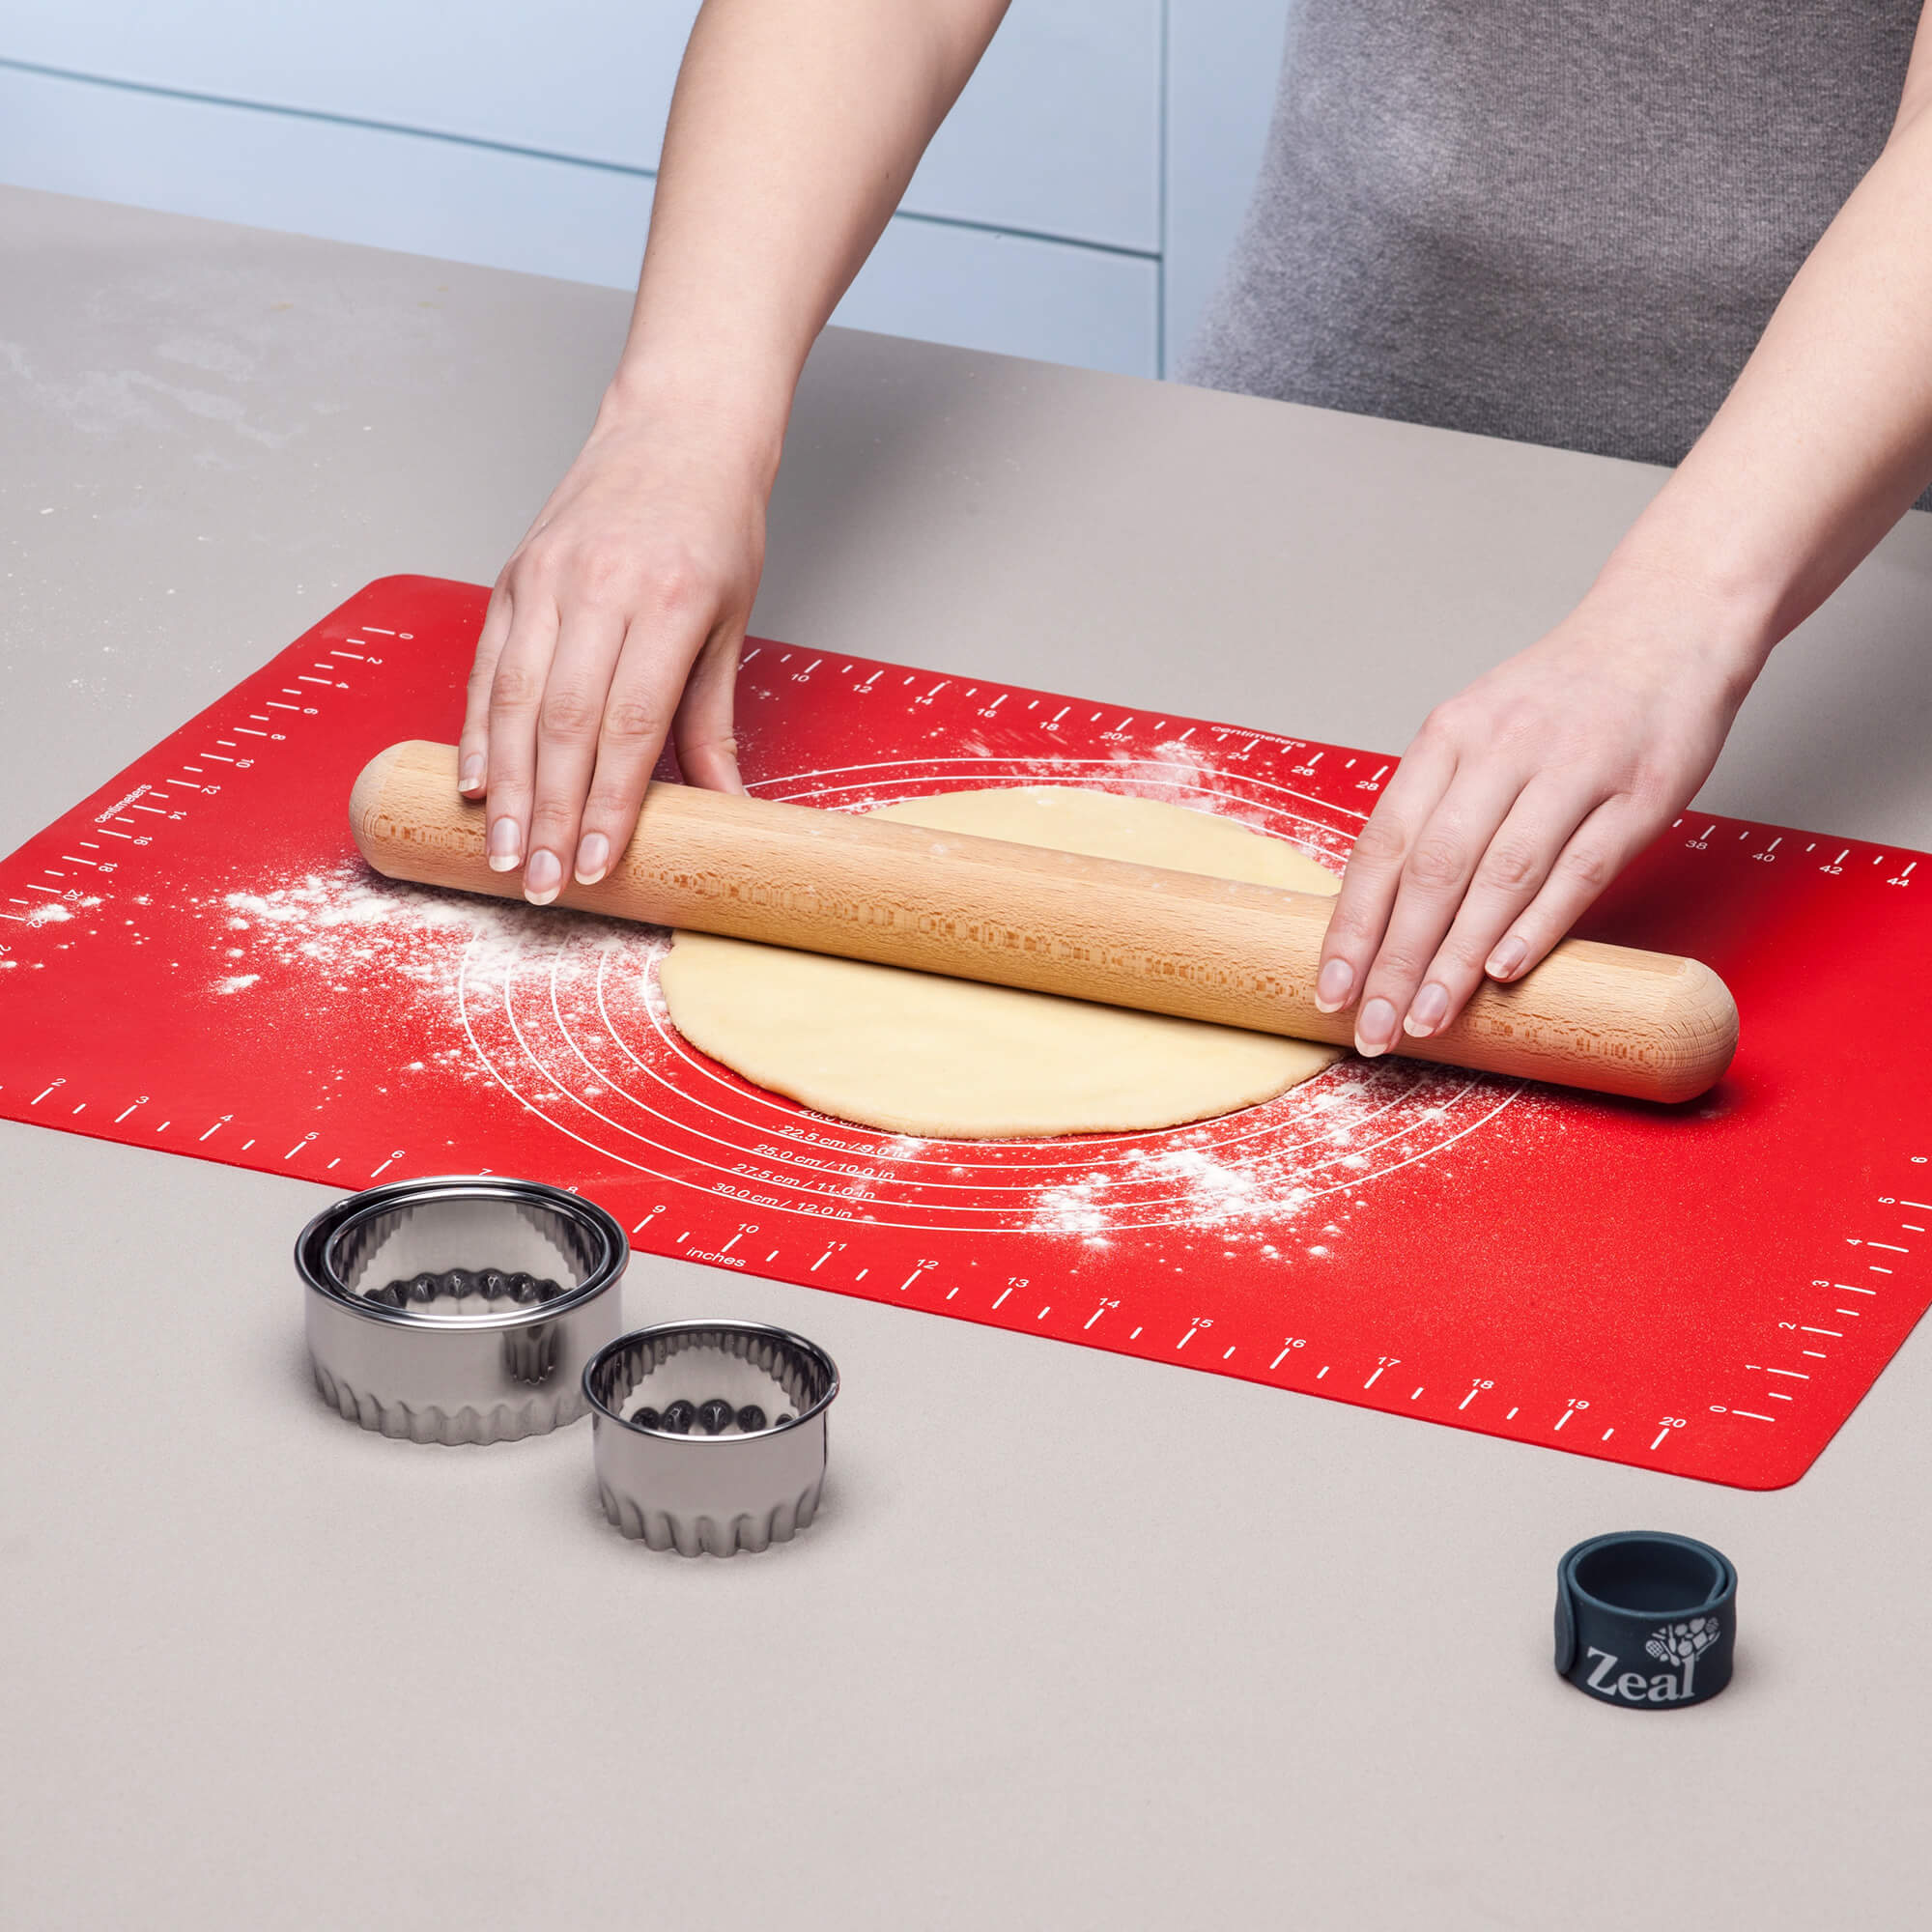 Using a Zeal Silicone Pastry Mat with Measurements when baking